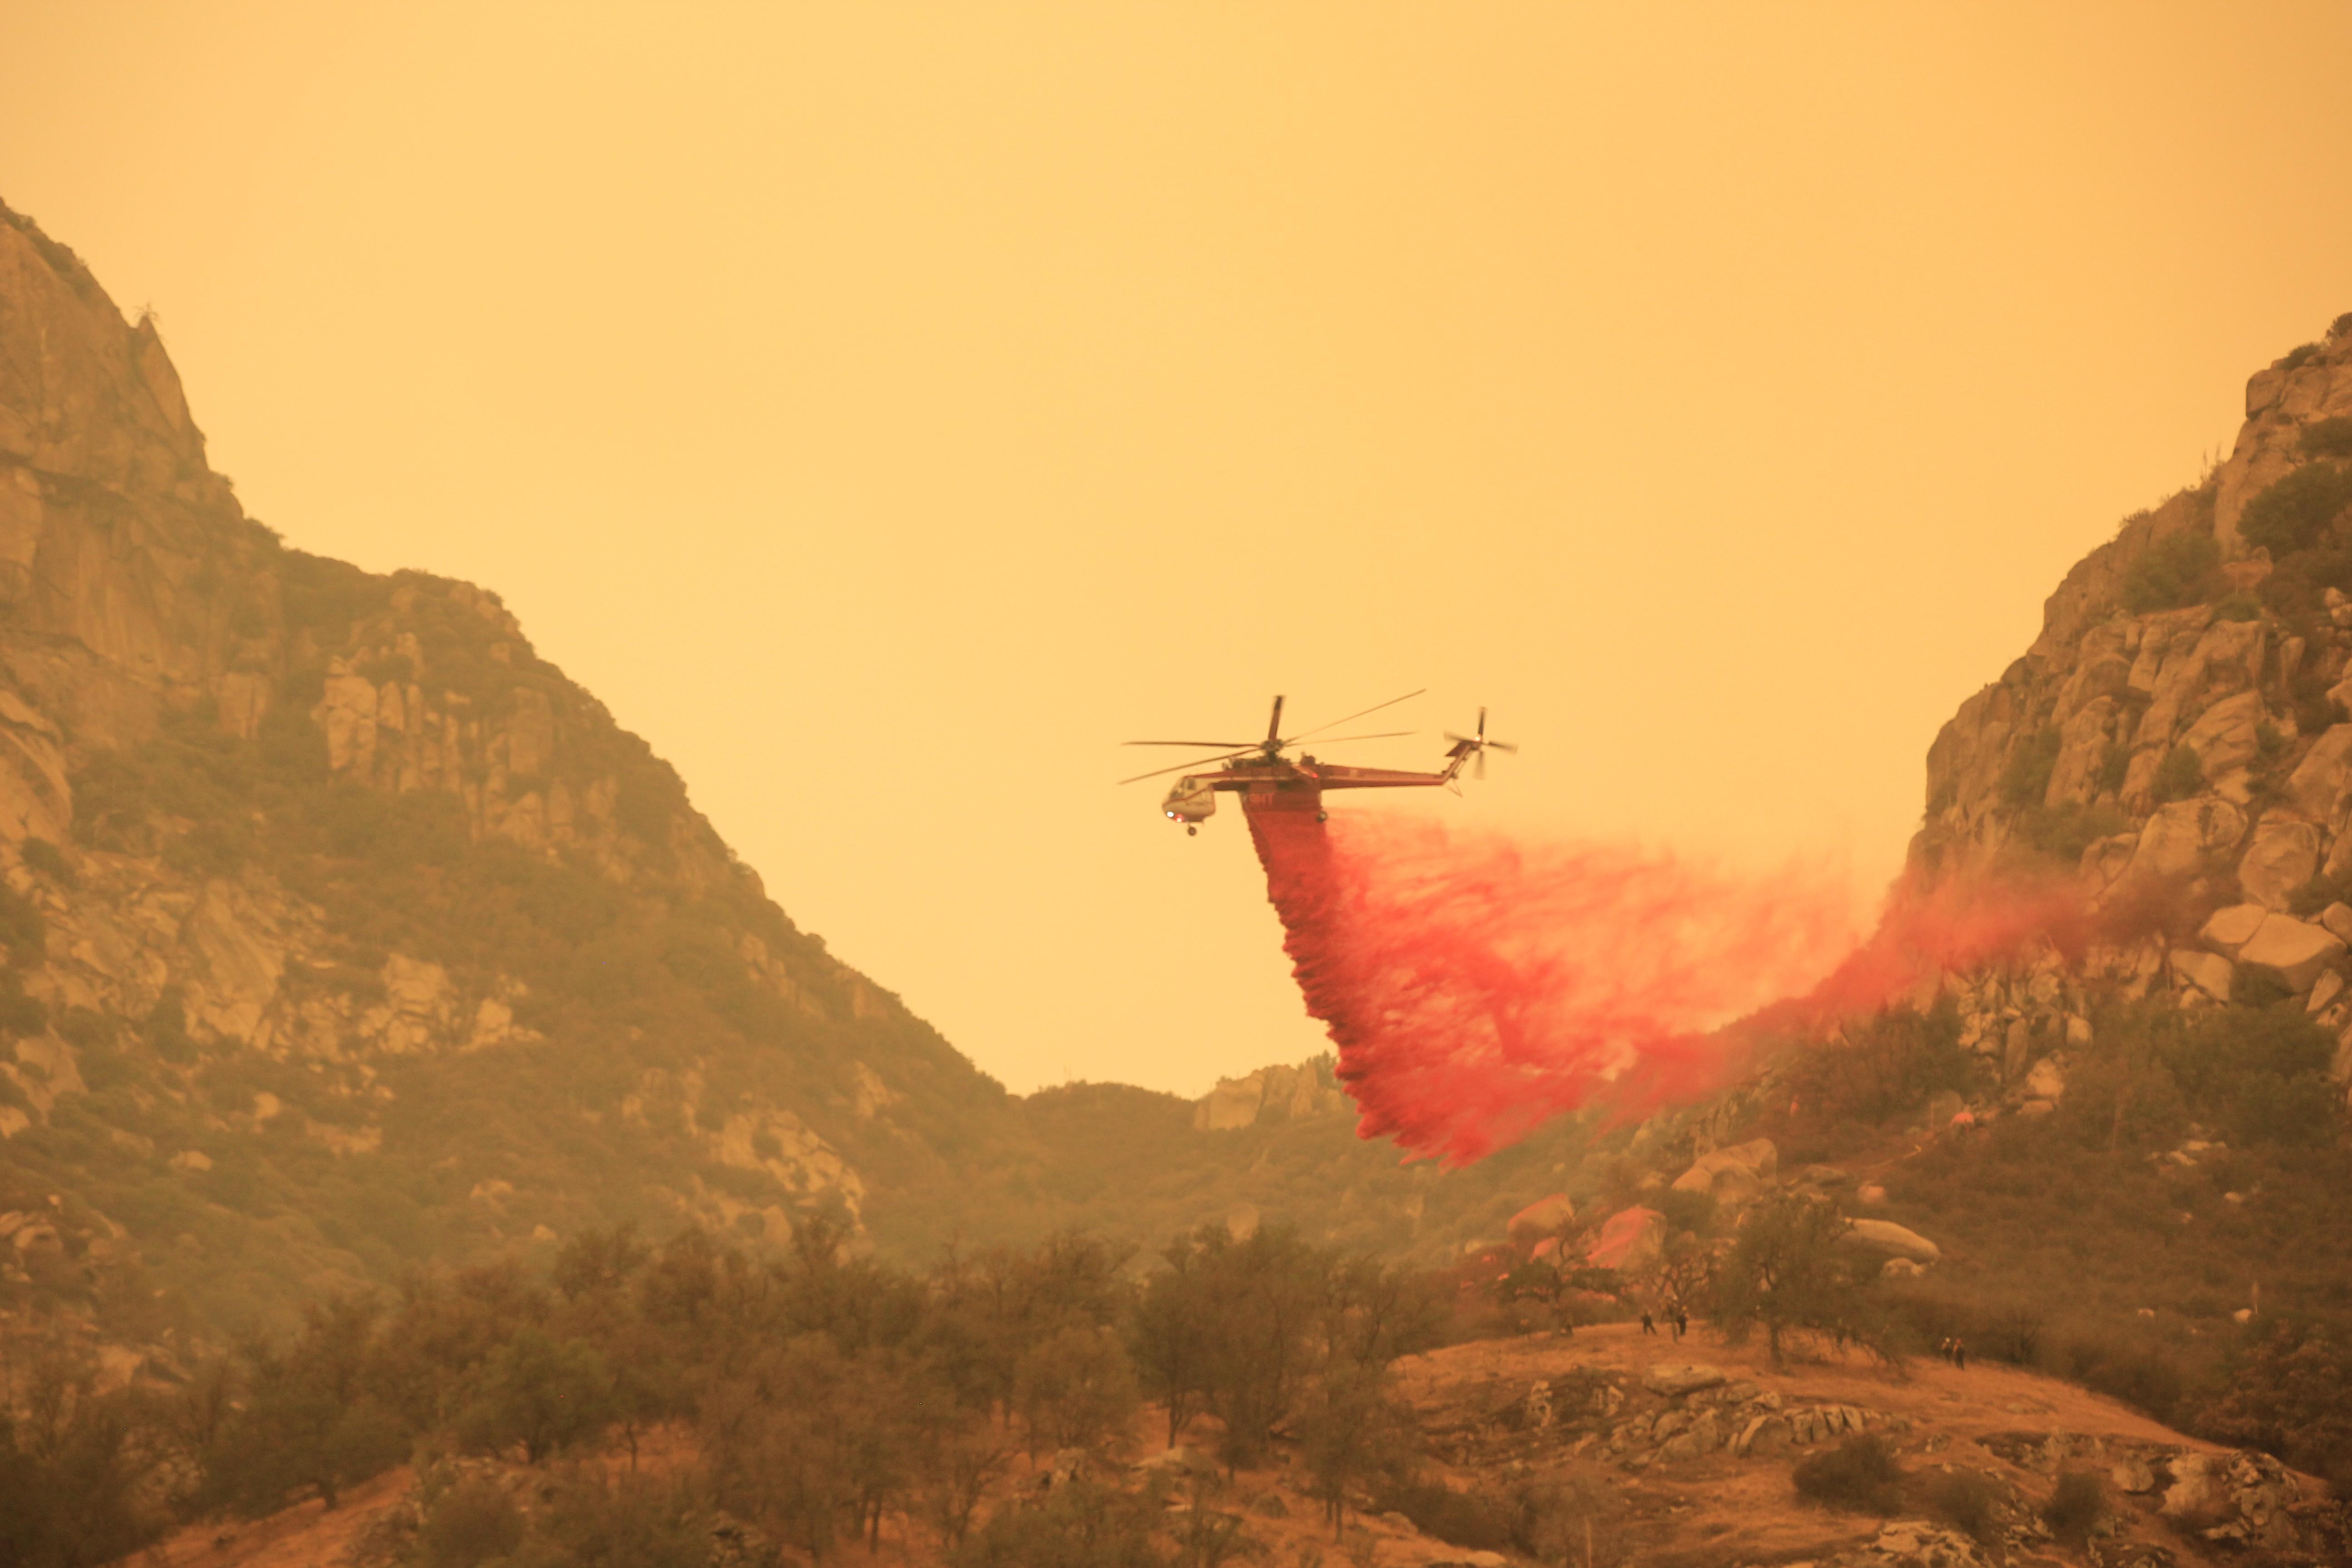 A helicopter drops red retardant across a valley